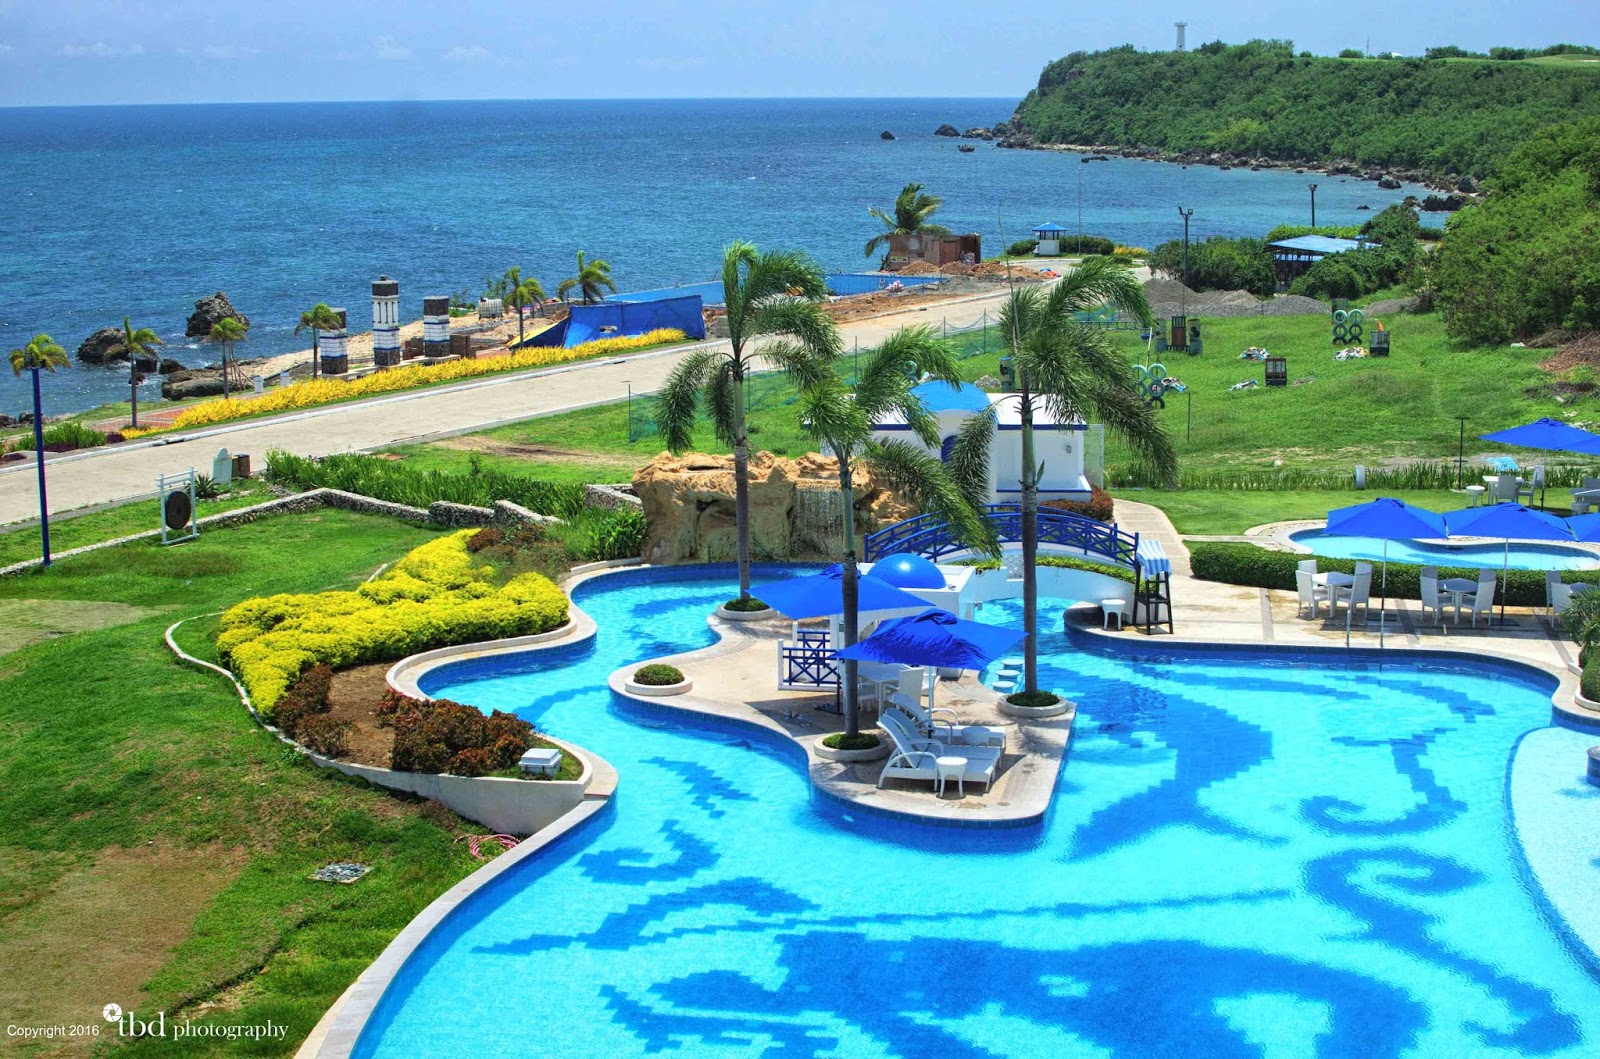 Santorini-style resorts in North Luzon - Traveling by default.